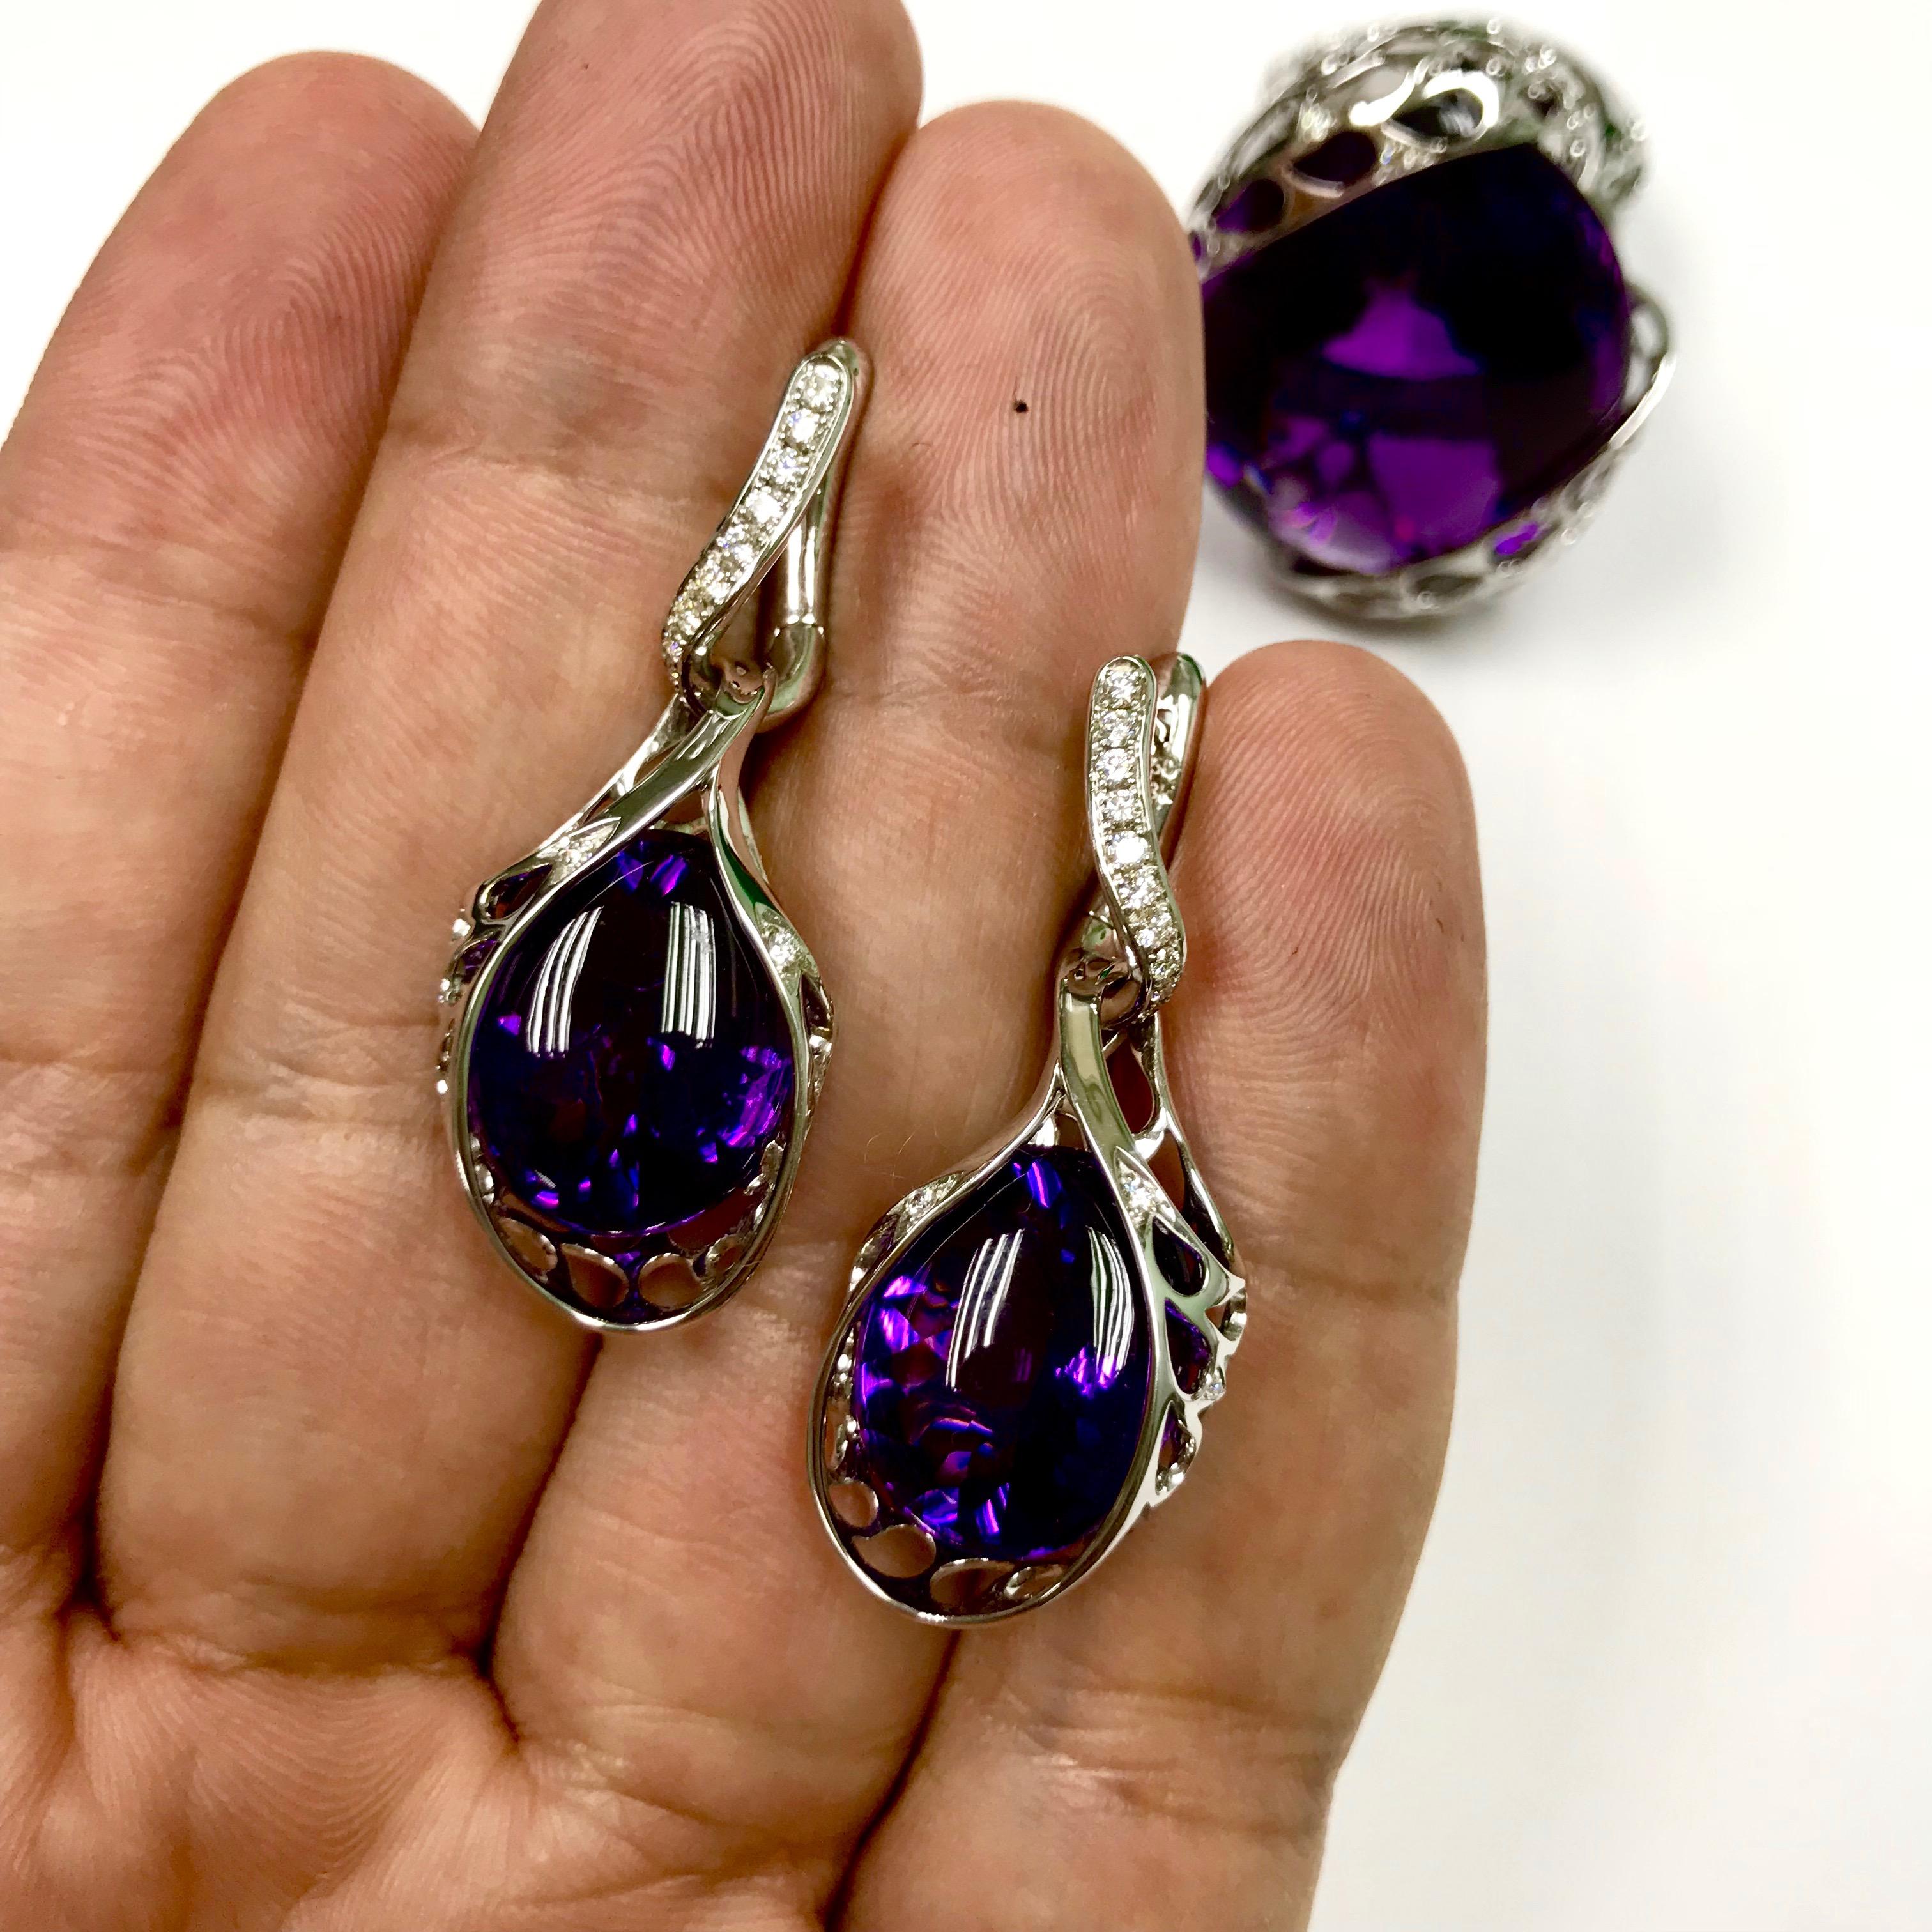 Pair of Brazilian Amethyst 19.9 carat, Diamond 0.38 carat. 18 Karat White Gold Earrings.
Can be wear without dangling part (day/night)
Available in set with the ring LU116414714331

16x40x10.2 mm
13.81 gm
